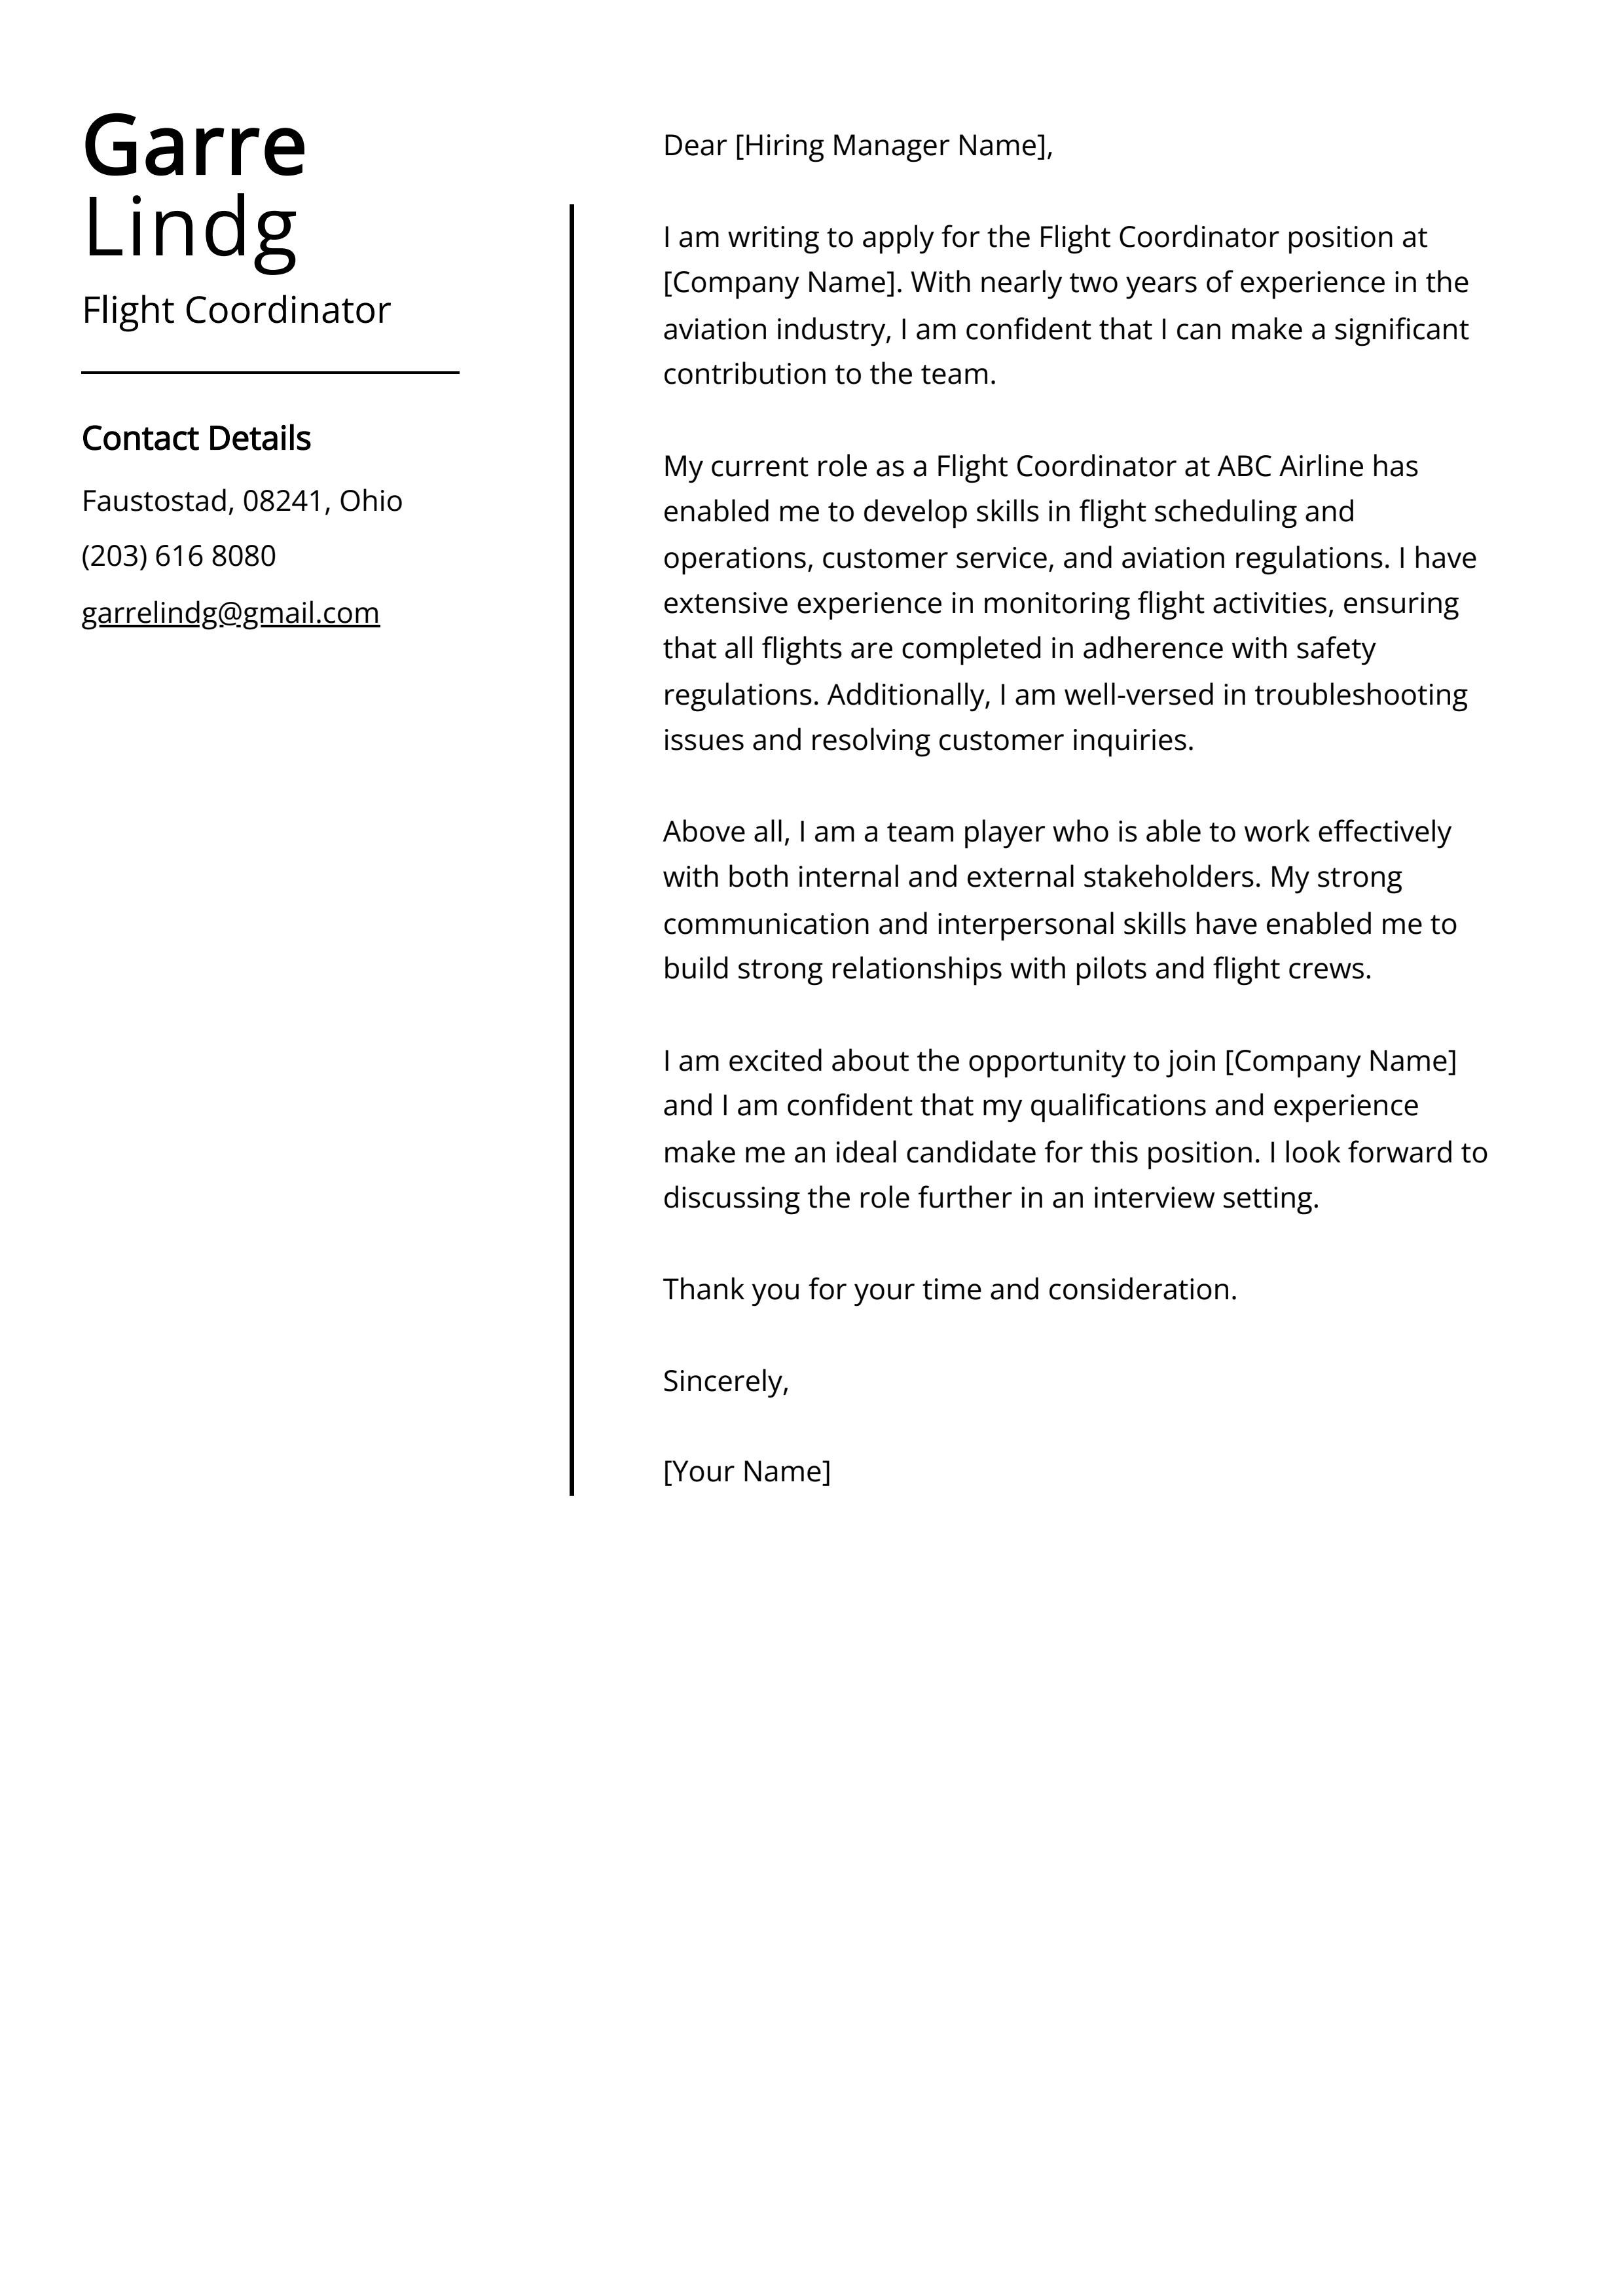 Flight Coordinator Cover Letter Example